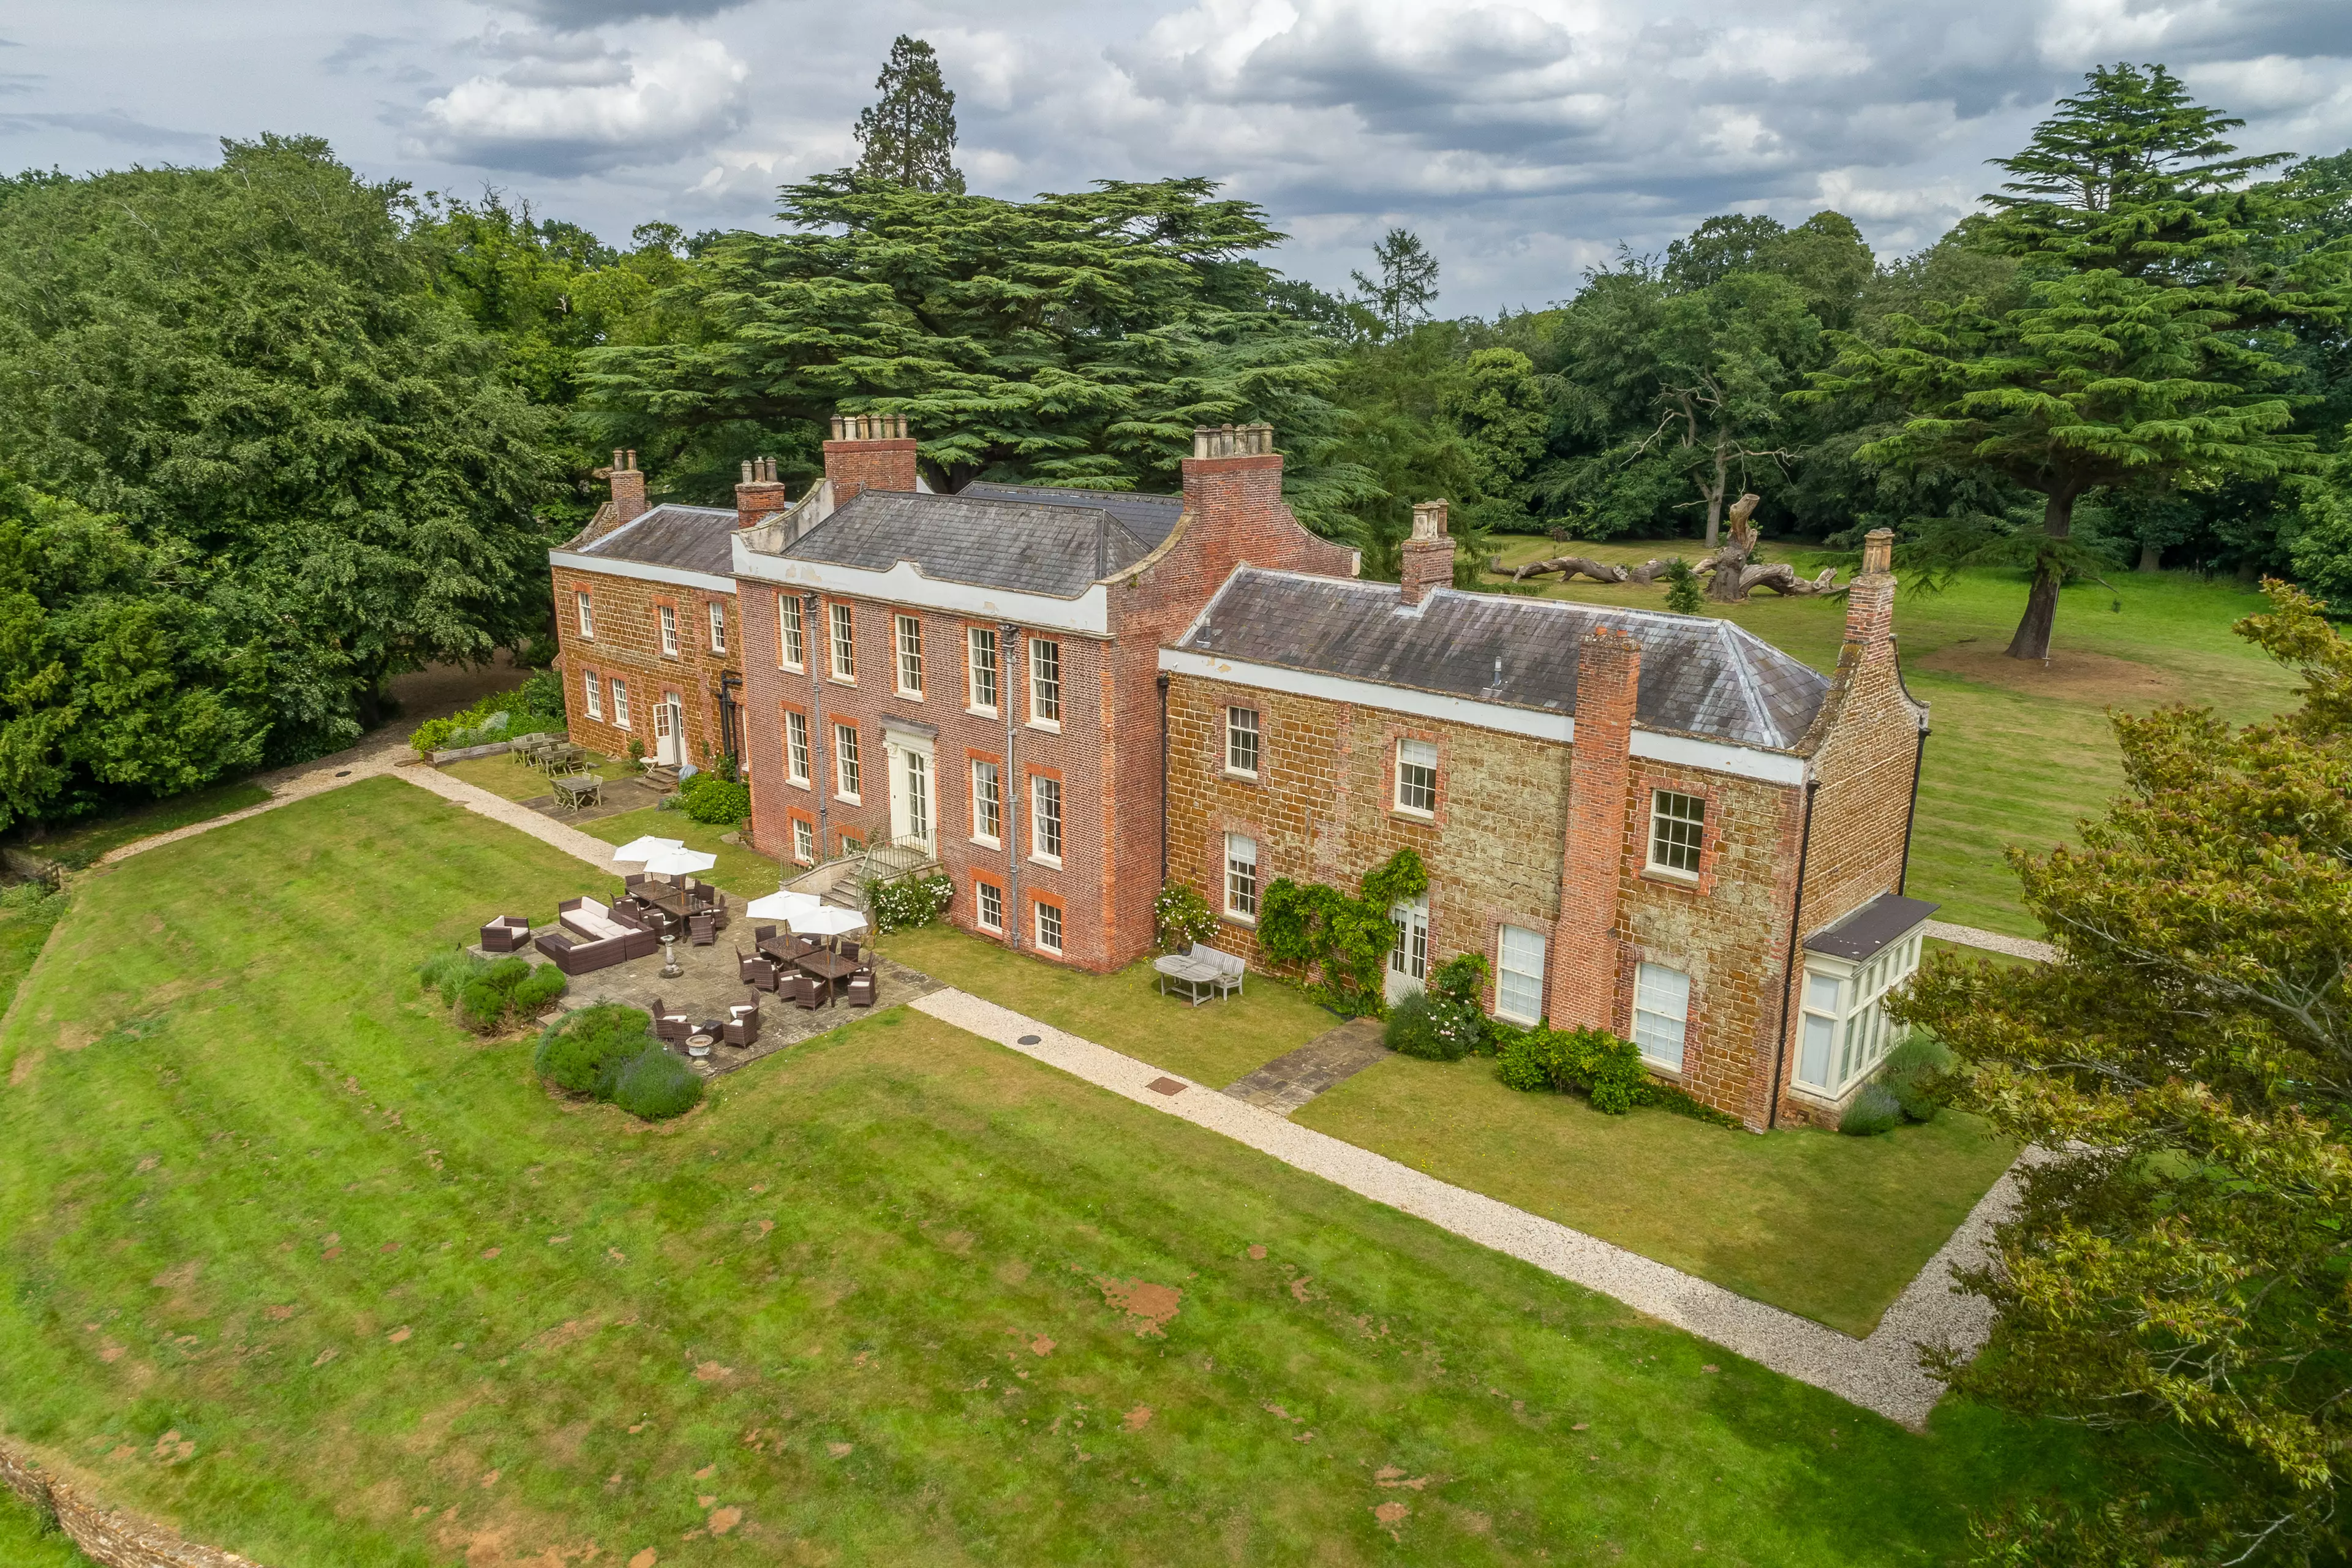 You'll be staying at the breathtaking Inglethorpe Hall (